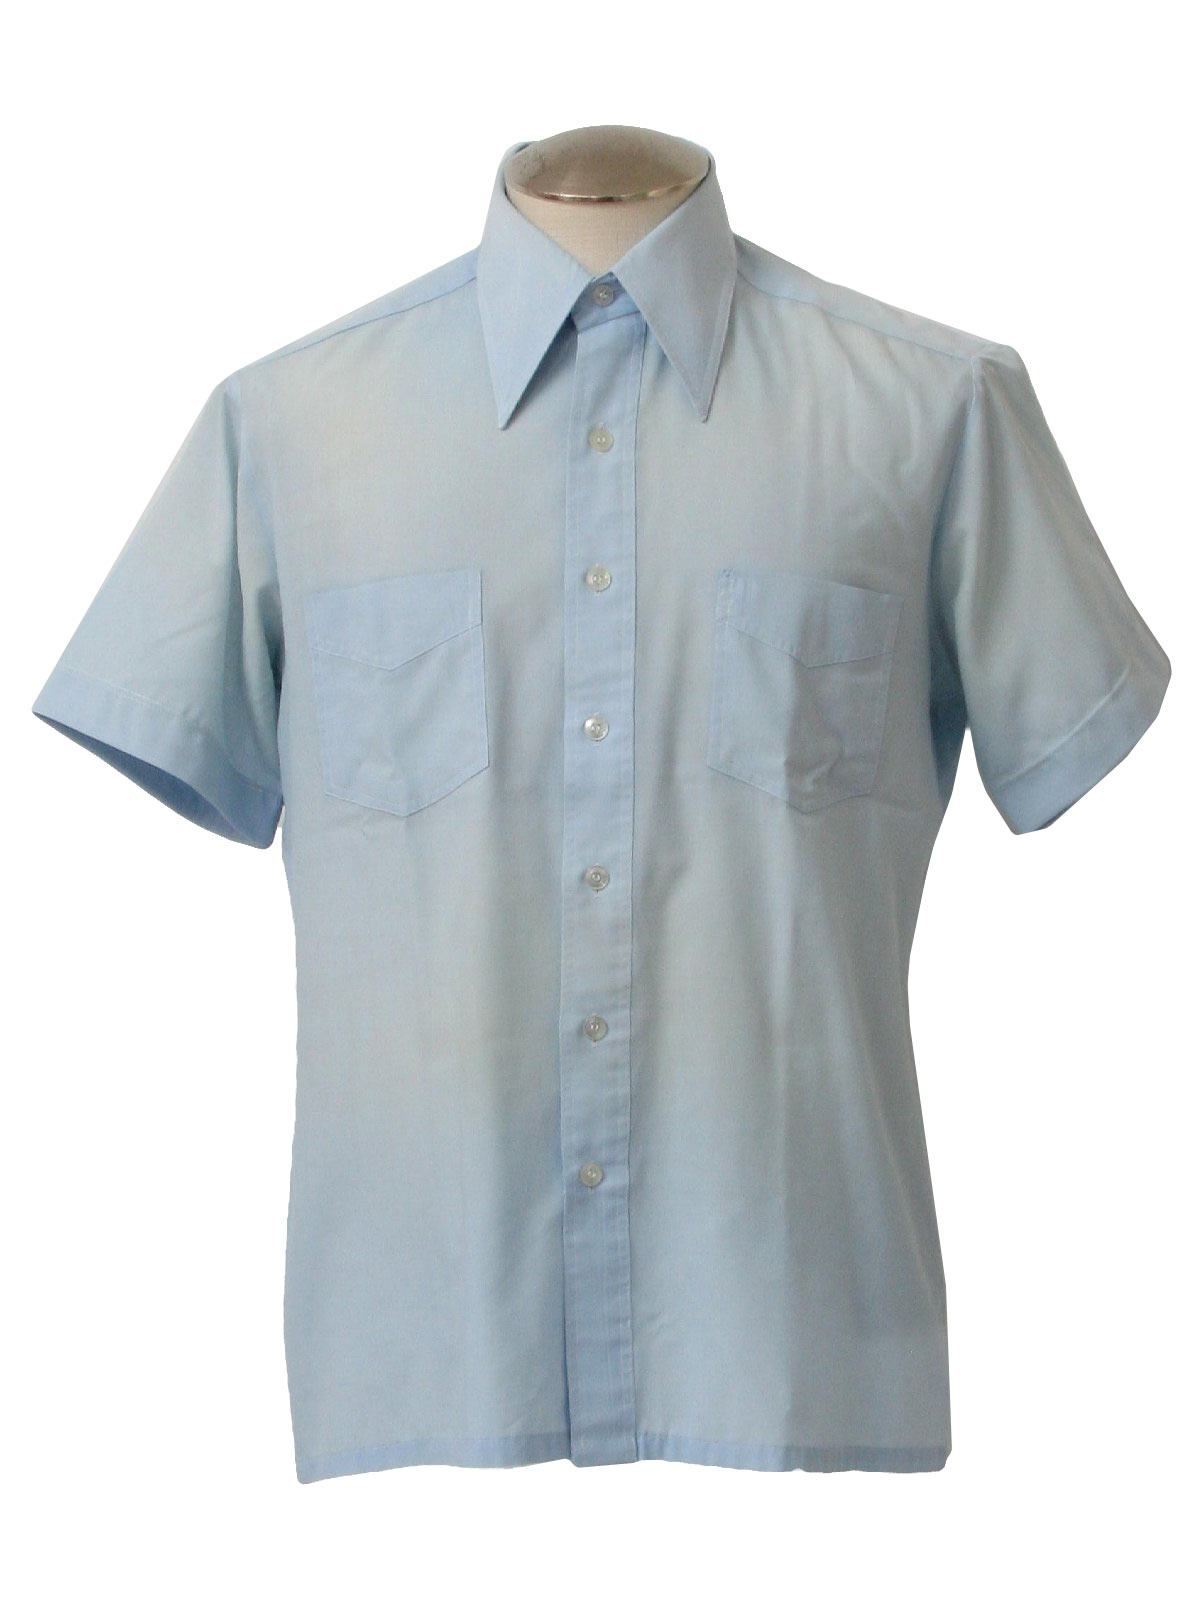 Seventies JCPenney Shirt: 70s -JCPenney- Mens baby blue, blended cotton ...